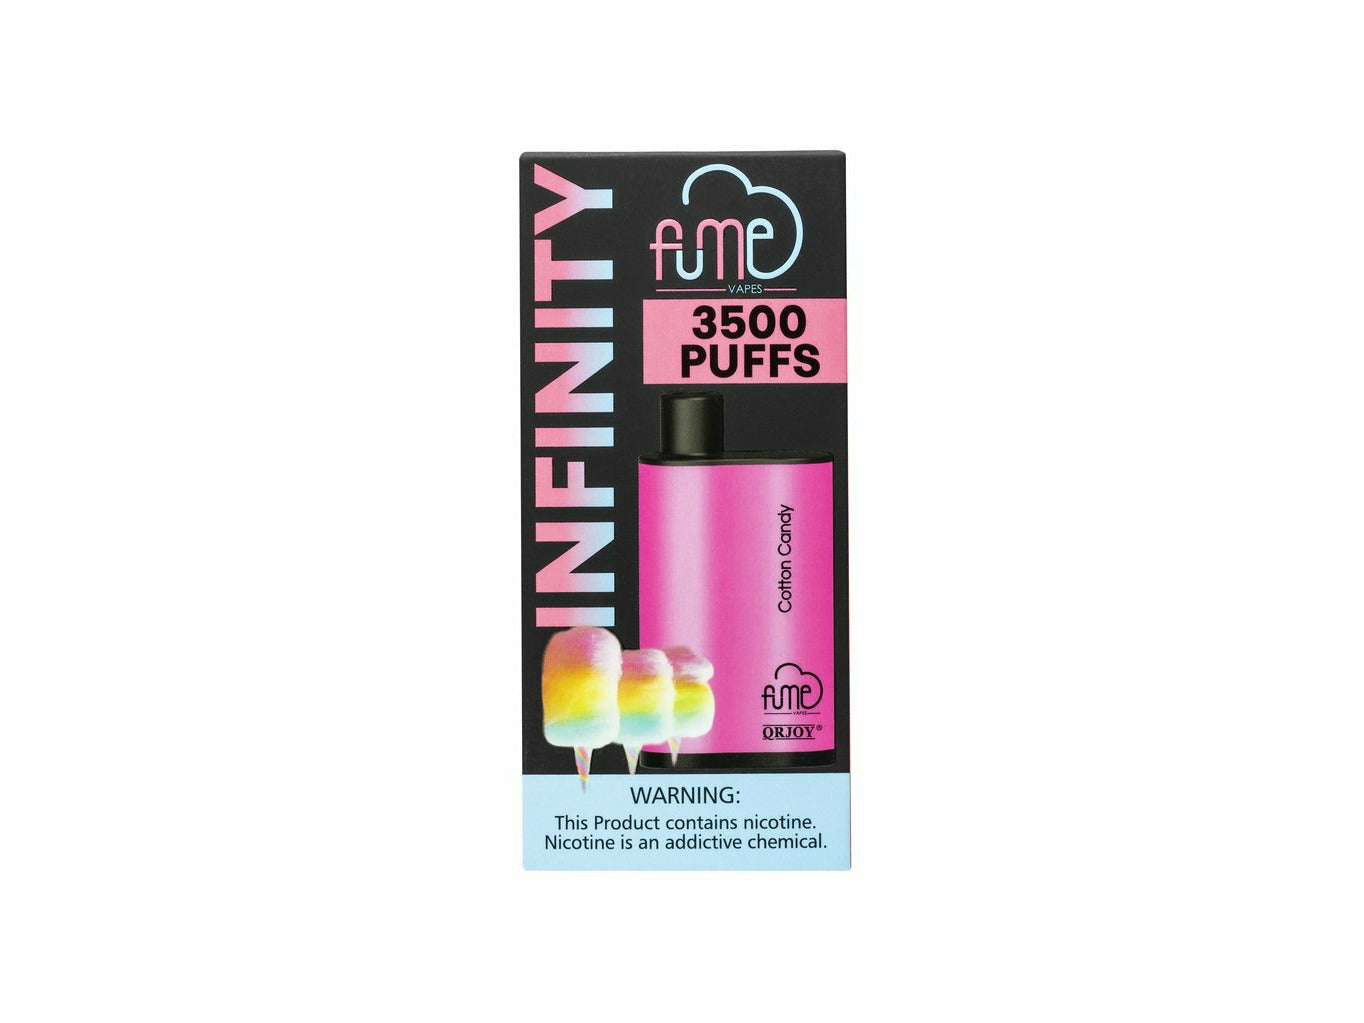 Fume Cotton Candy size Infinity disposable vape device box